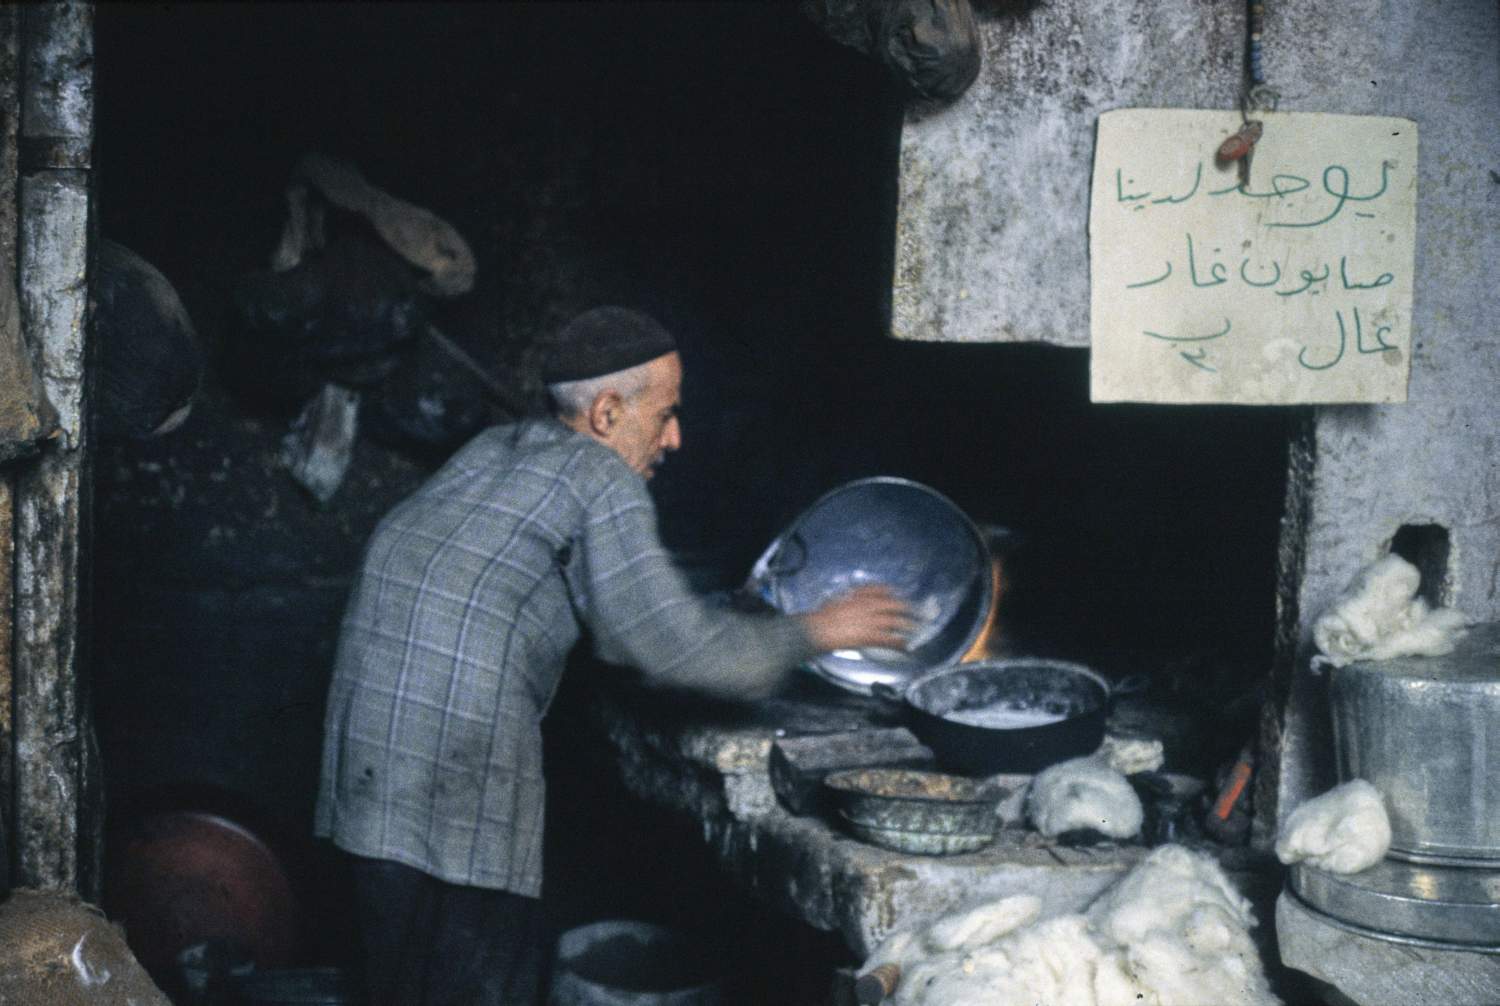 Man in shop with sign advertising laurel soap.